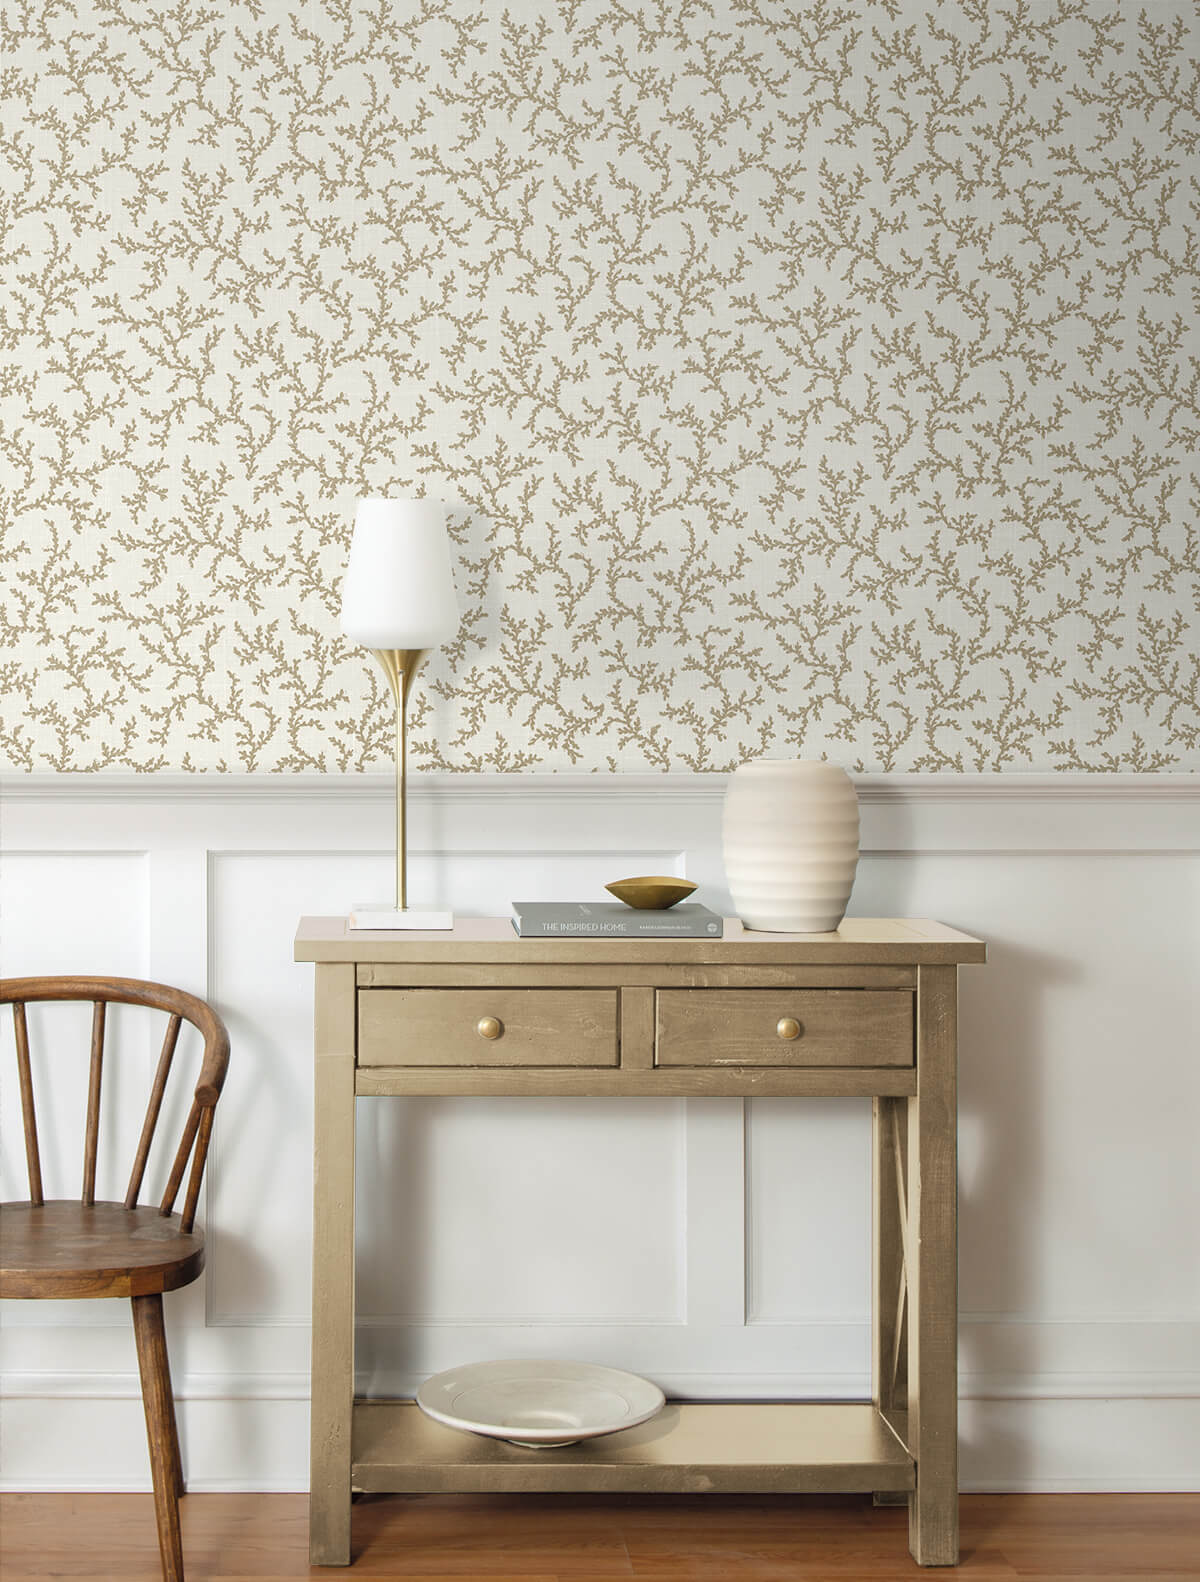 Seabrook French Country Corail Wallpaper - Driftwood